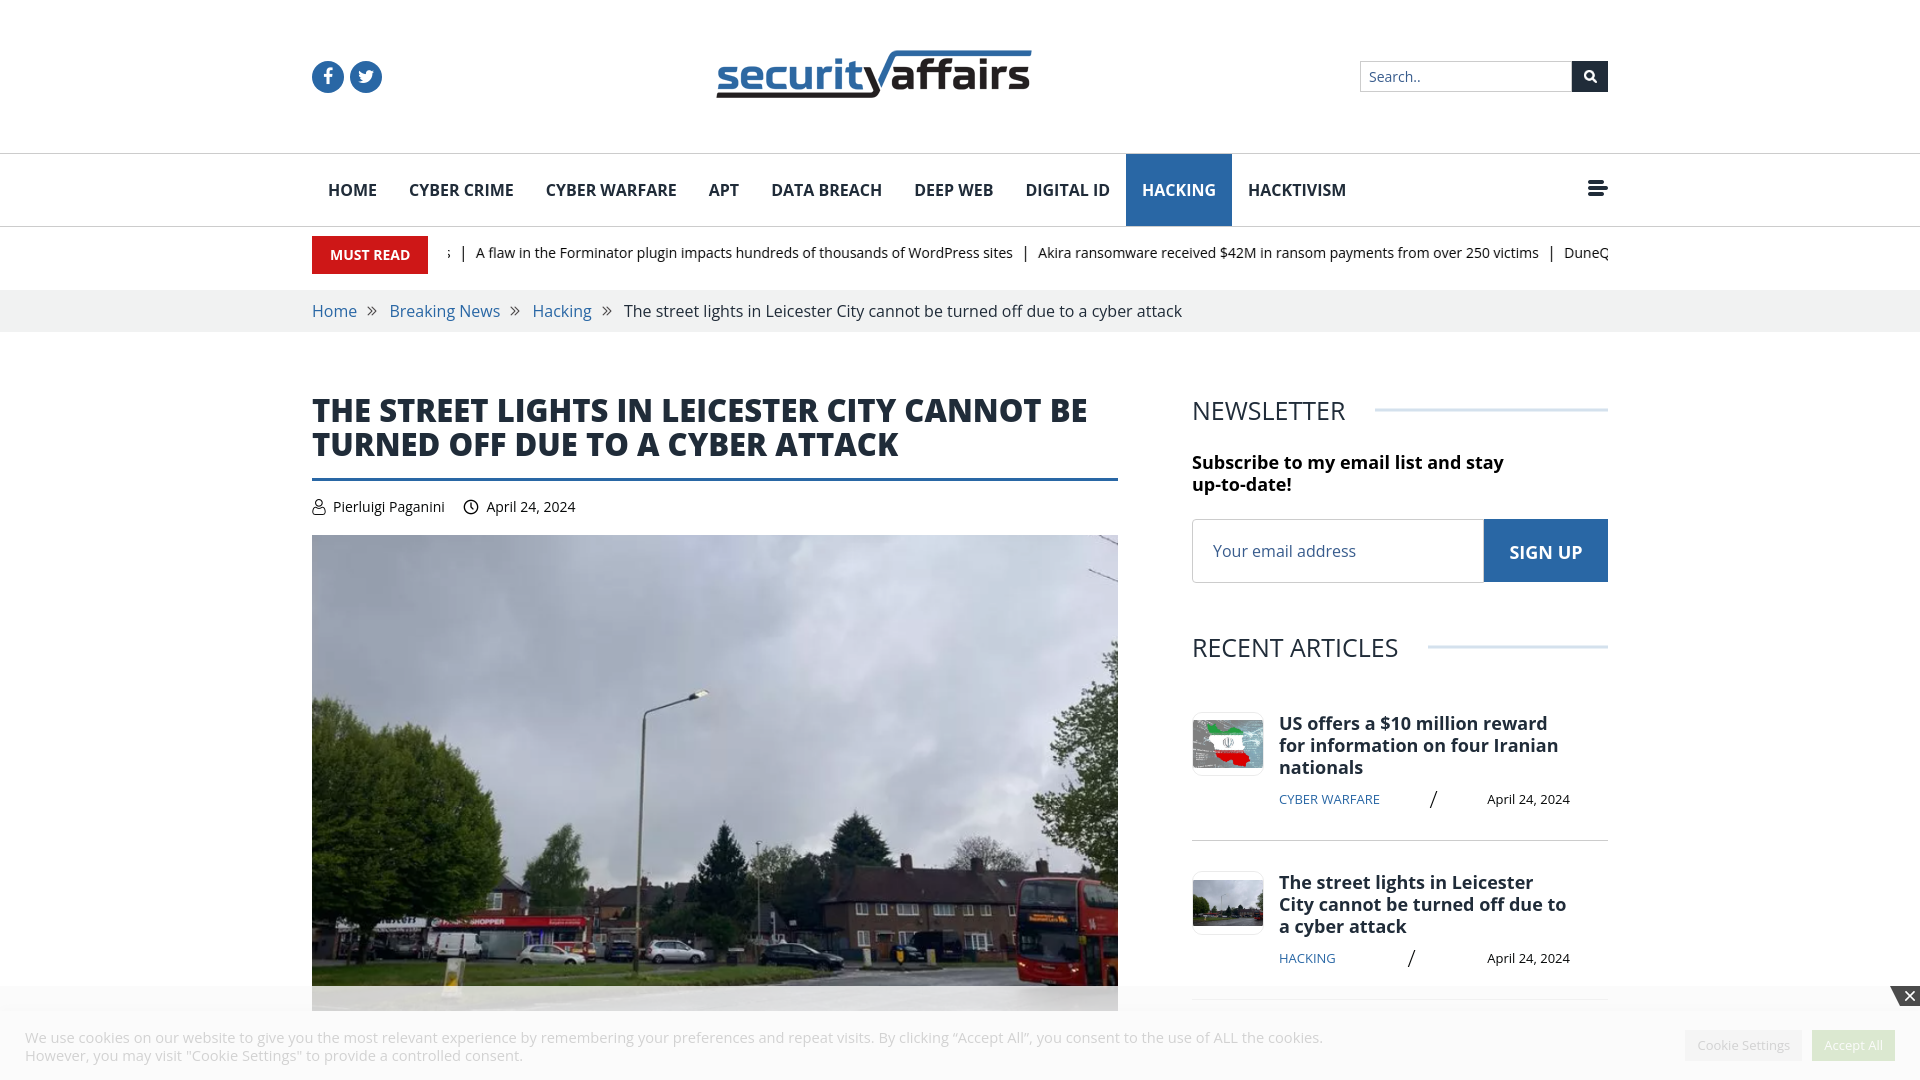 Street lights in Leicester City cannot be turned off due to a cyber attack